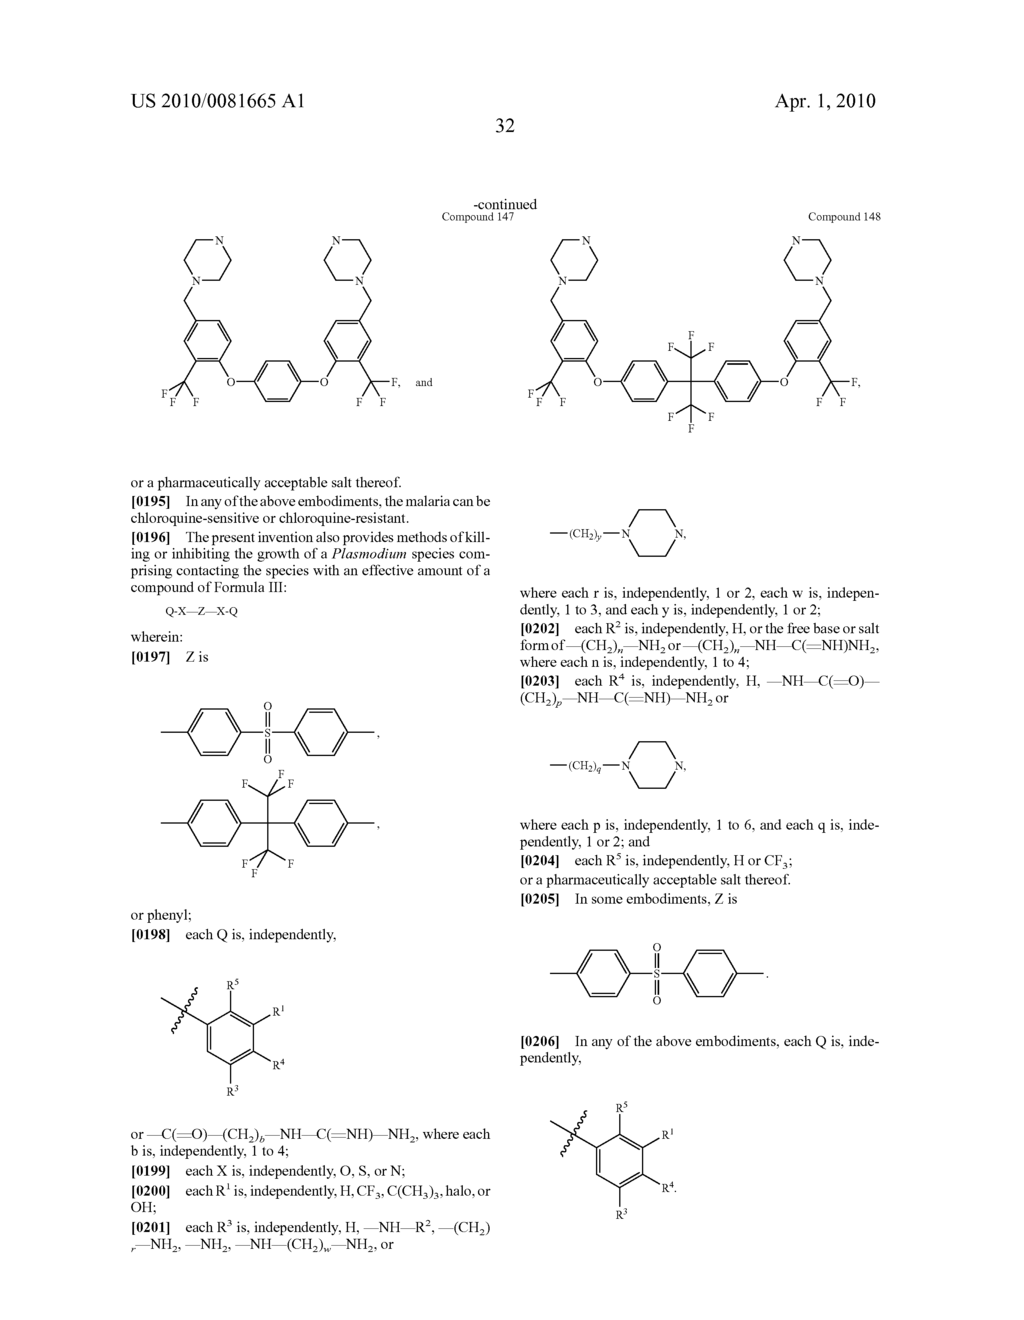 Anti-Malarial Compounds - diagram, schematic, and image 33